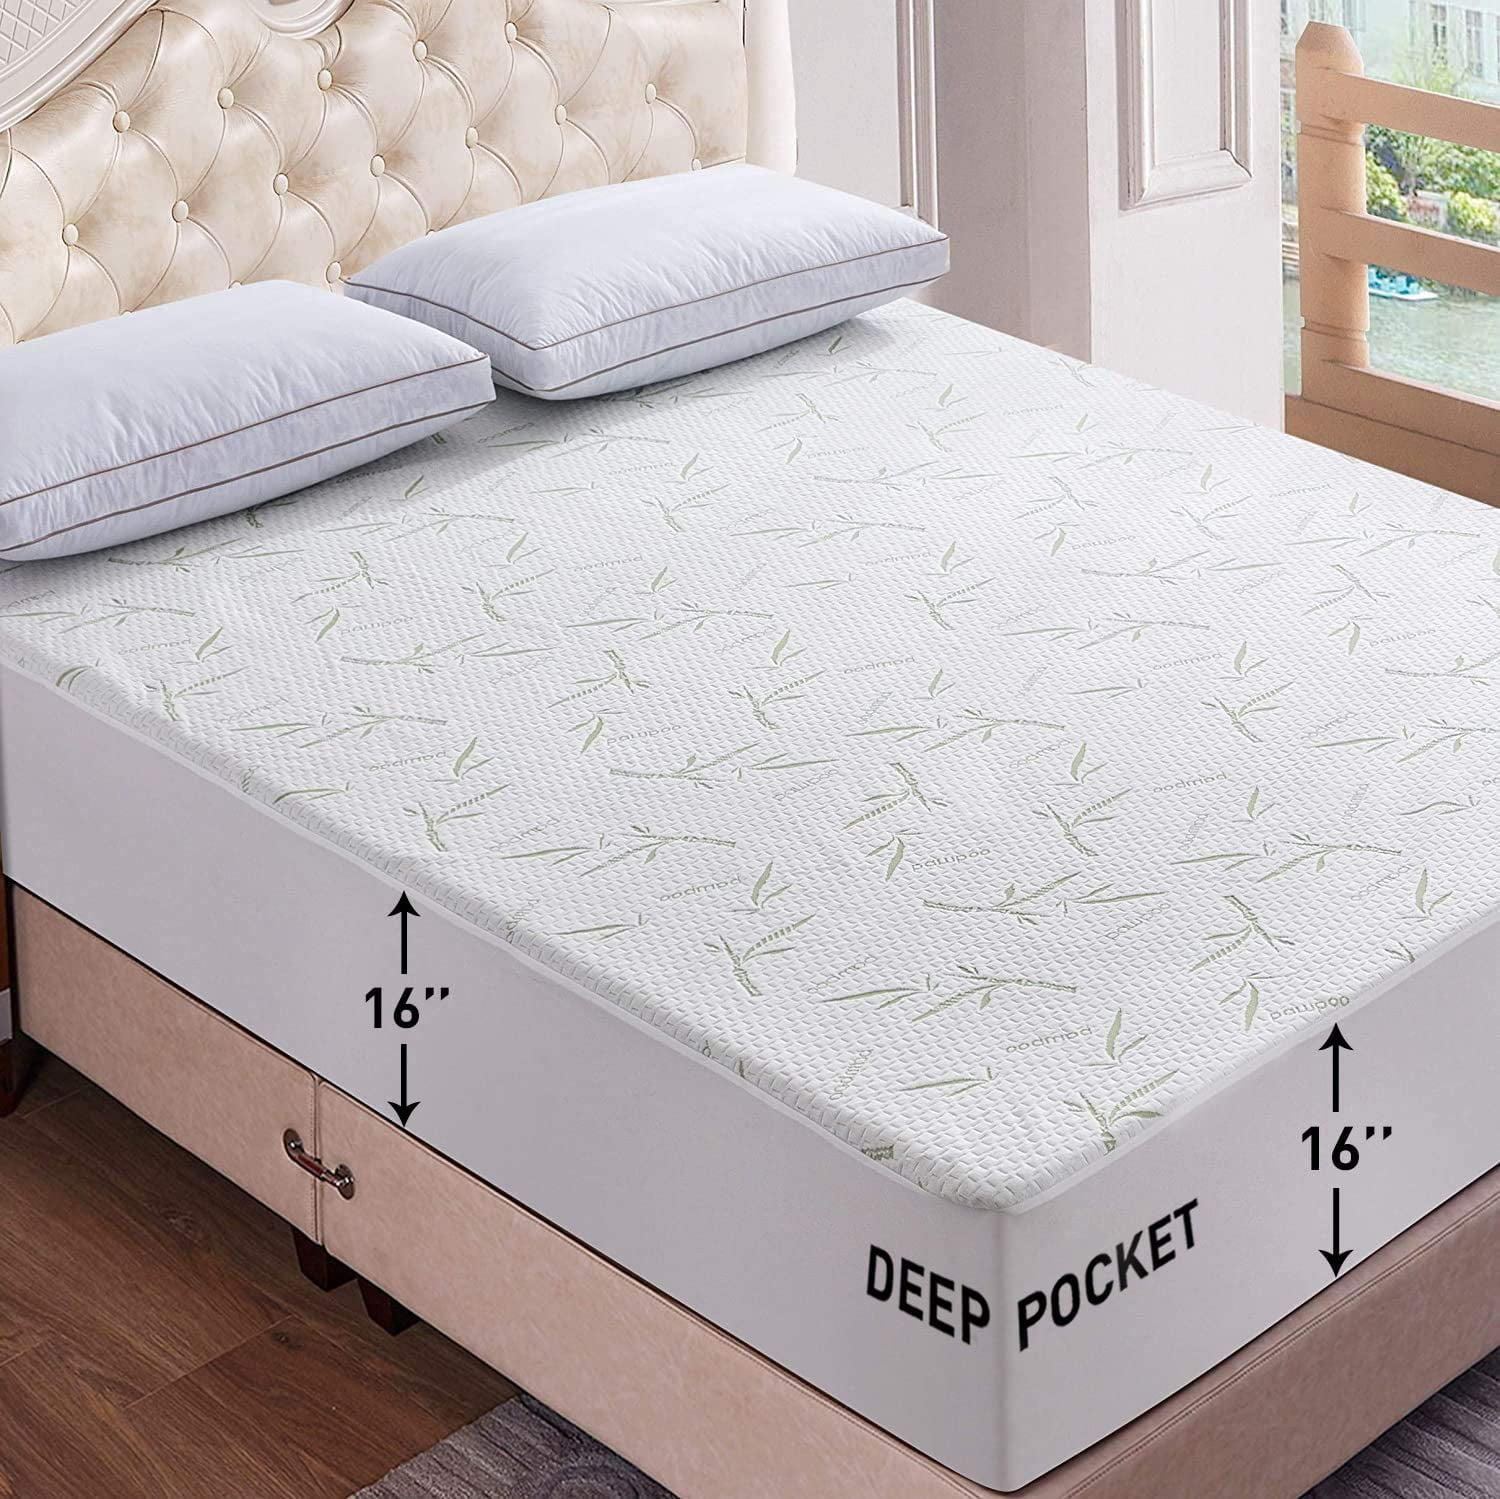 Bamboo Mattress Protector King Size - Breathable Waterproof